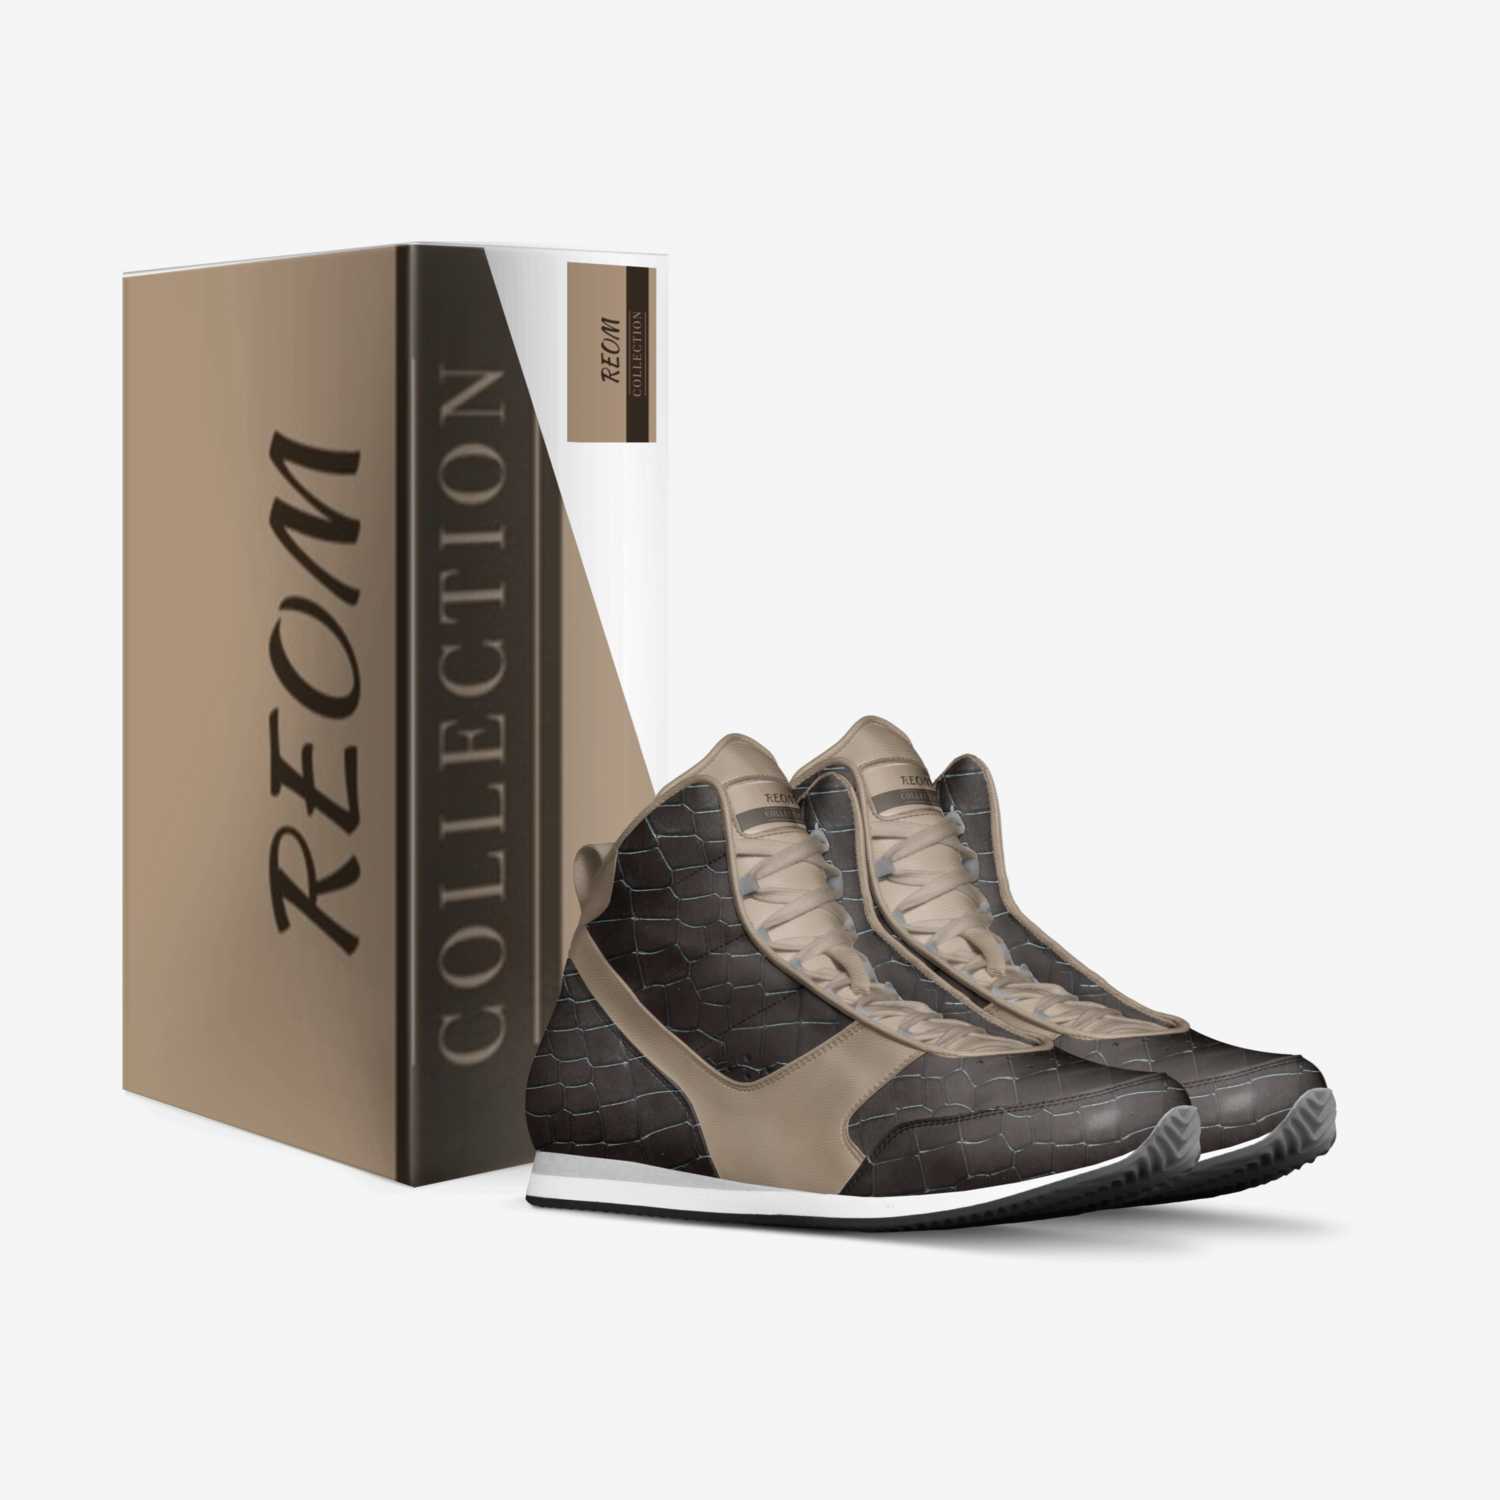 REOM custom made in Italy shoes by Tyrese Payeton | Box view